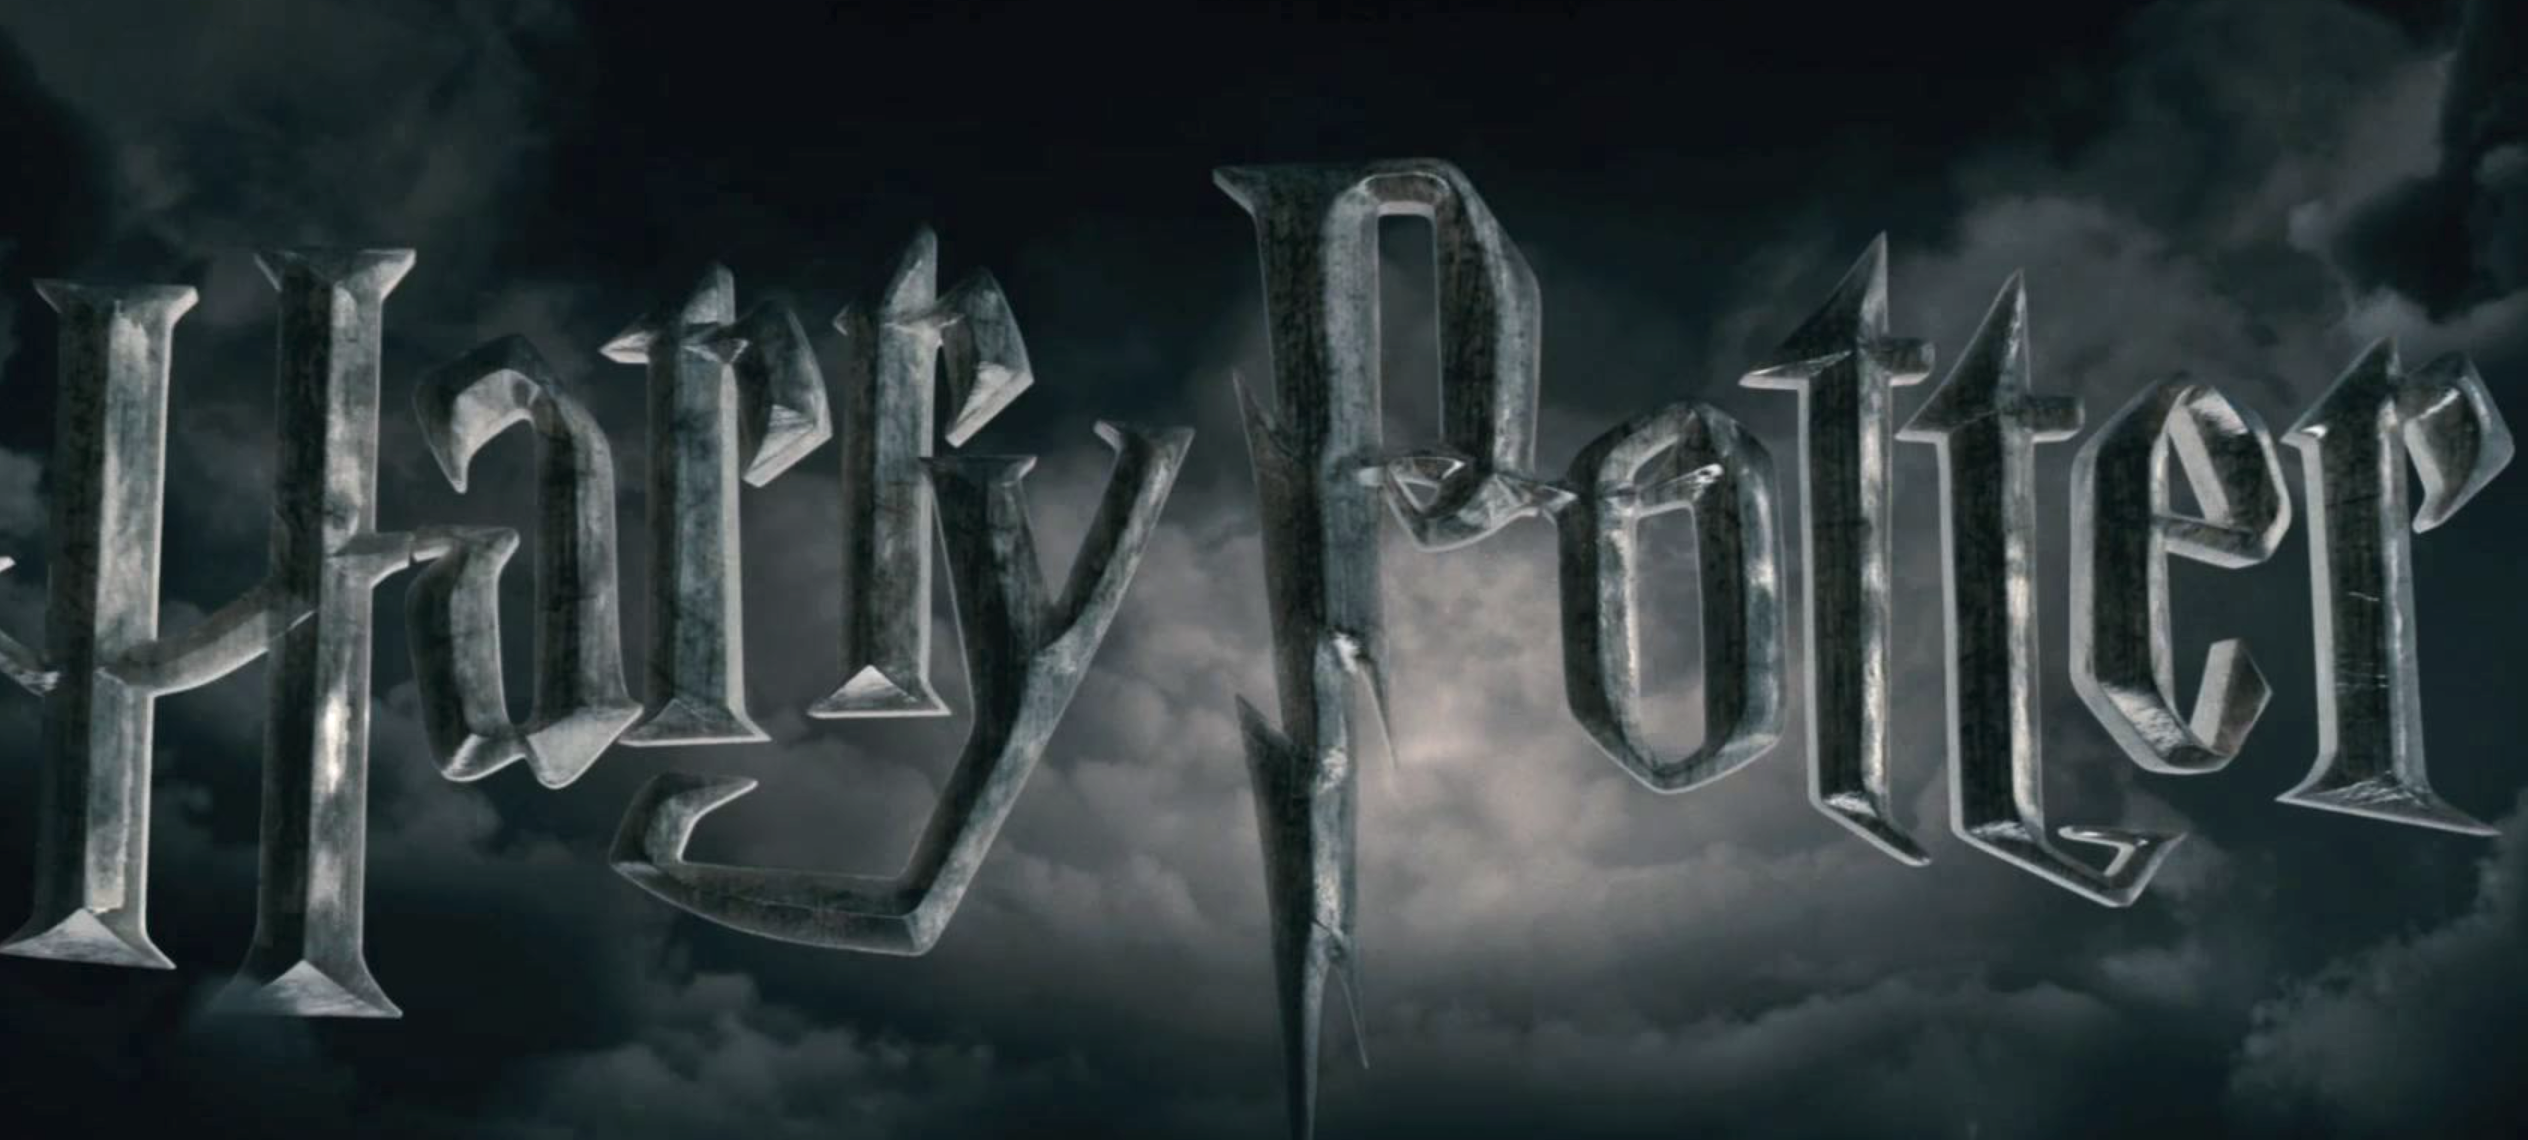 HBO Max Is in Talks for Harry Potter Series